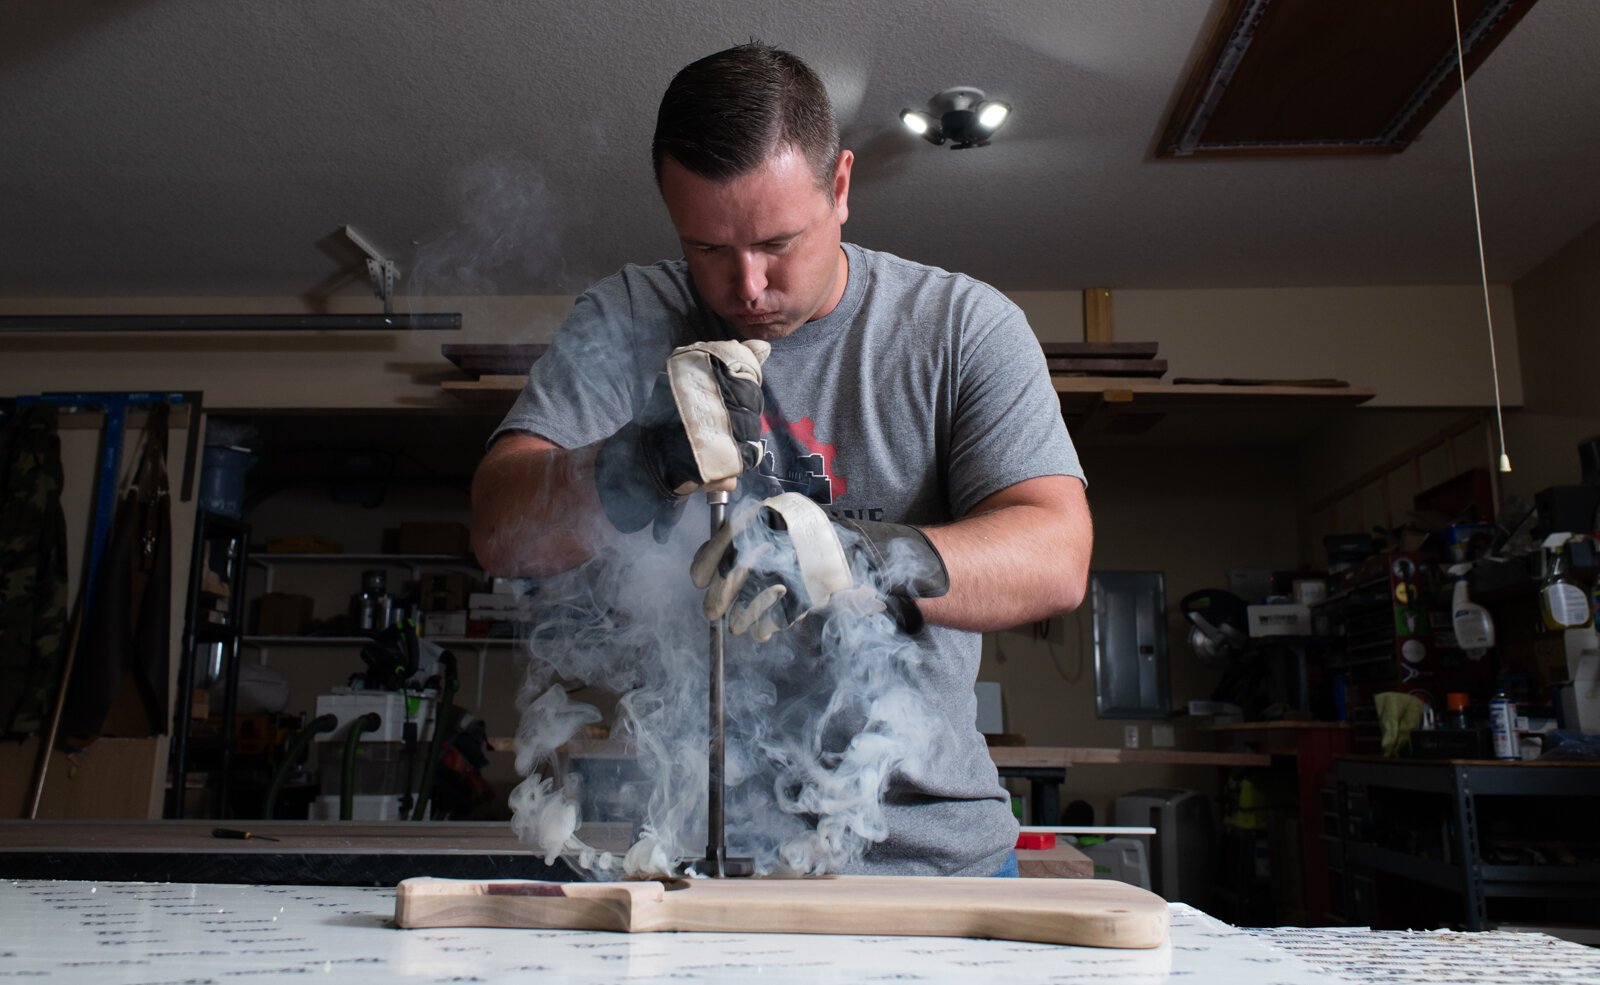 Lee Hoffmeier of Fort Wayne Industrial Revolution brands one of his craft charcuterie boards using a blowtorch.